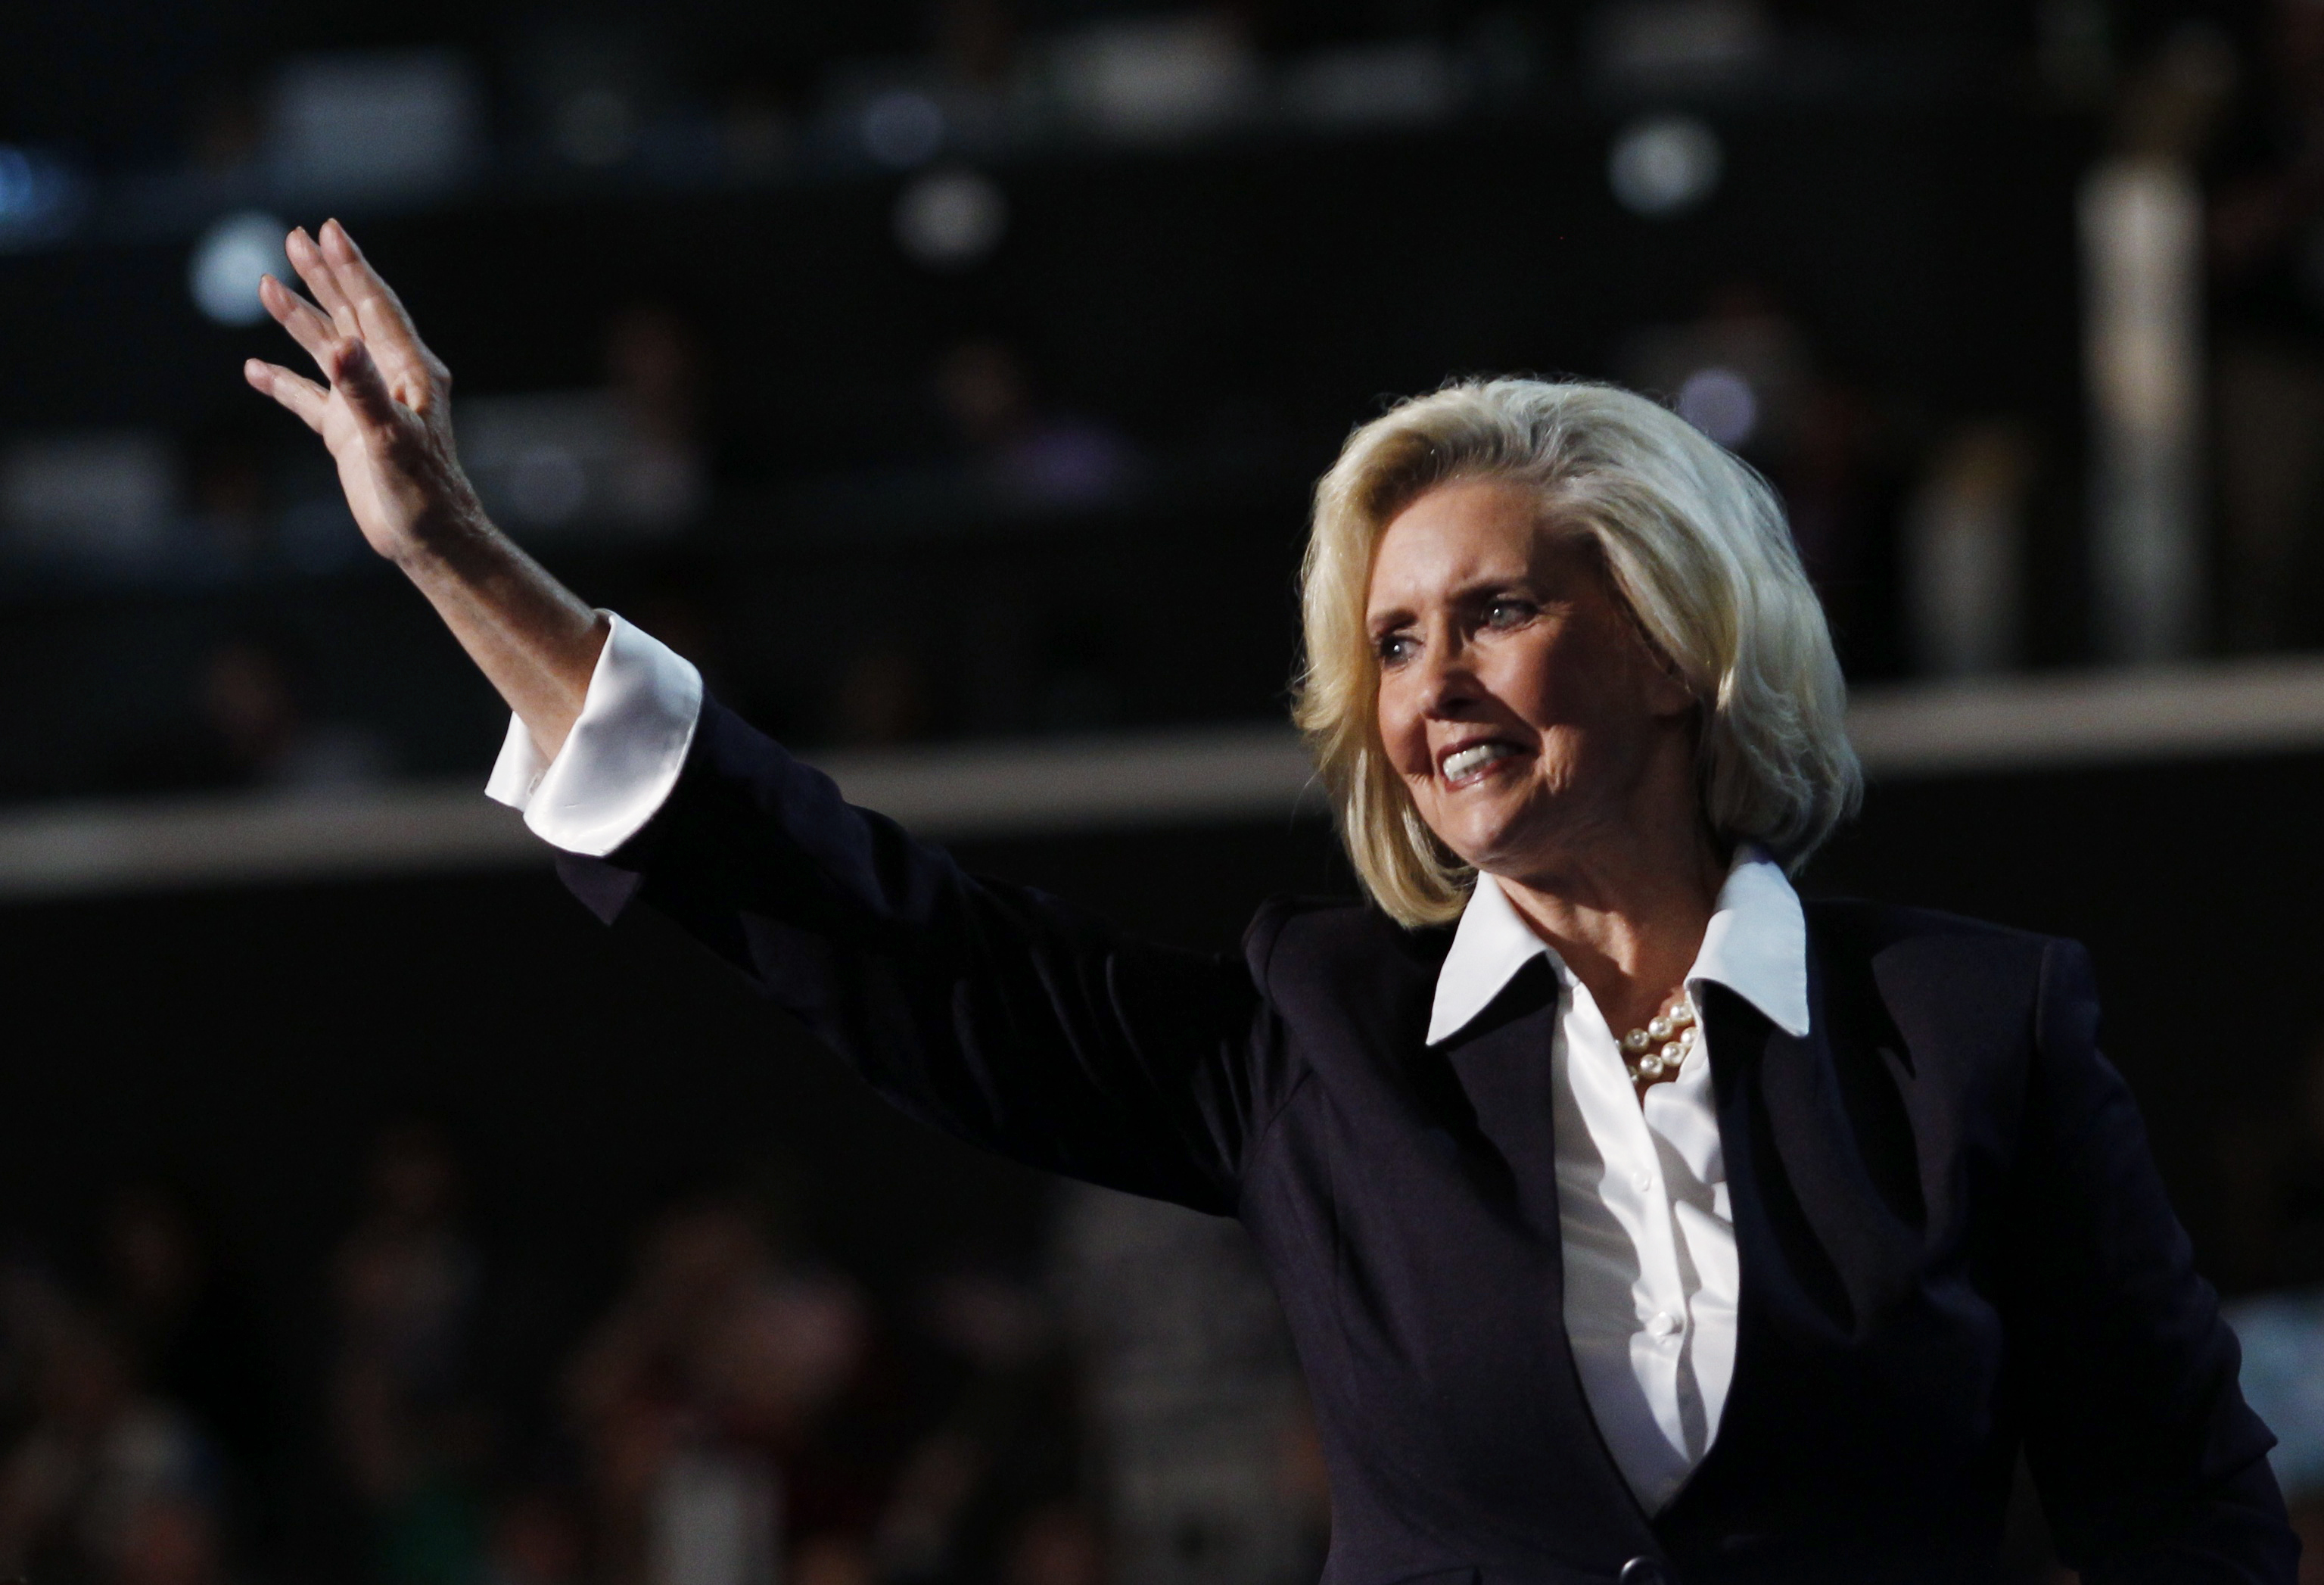 Women's rights leader Lilly Ledbetter, namesake of the Lilly Ledbetter Fair Pay Act, addresses the first session of the Democratic National Convention in Charlotte, N.C., on Sept. 4, 2012. (Jessica Rinaldi—Reuters)